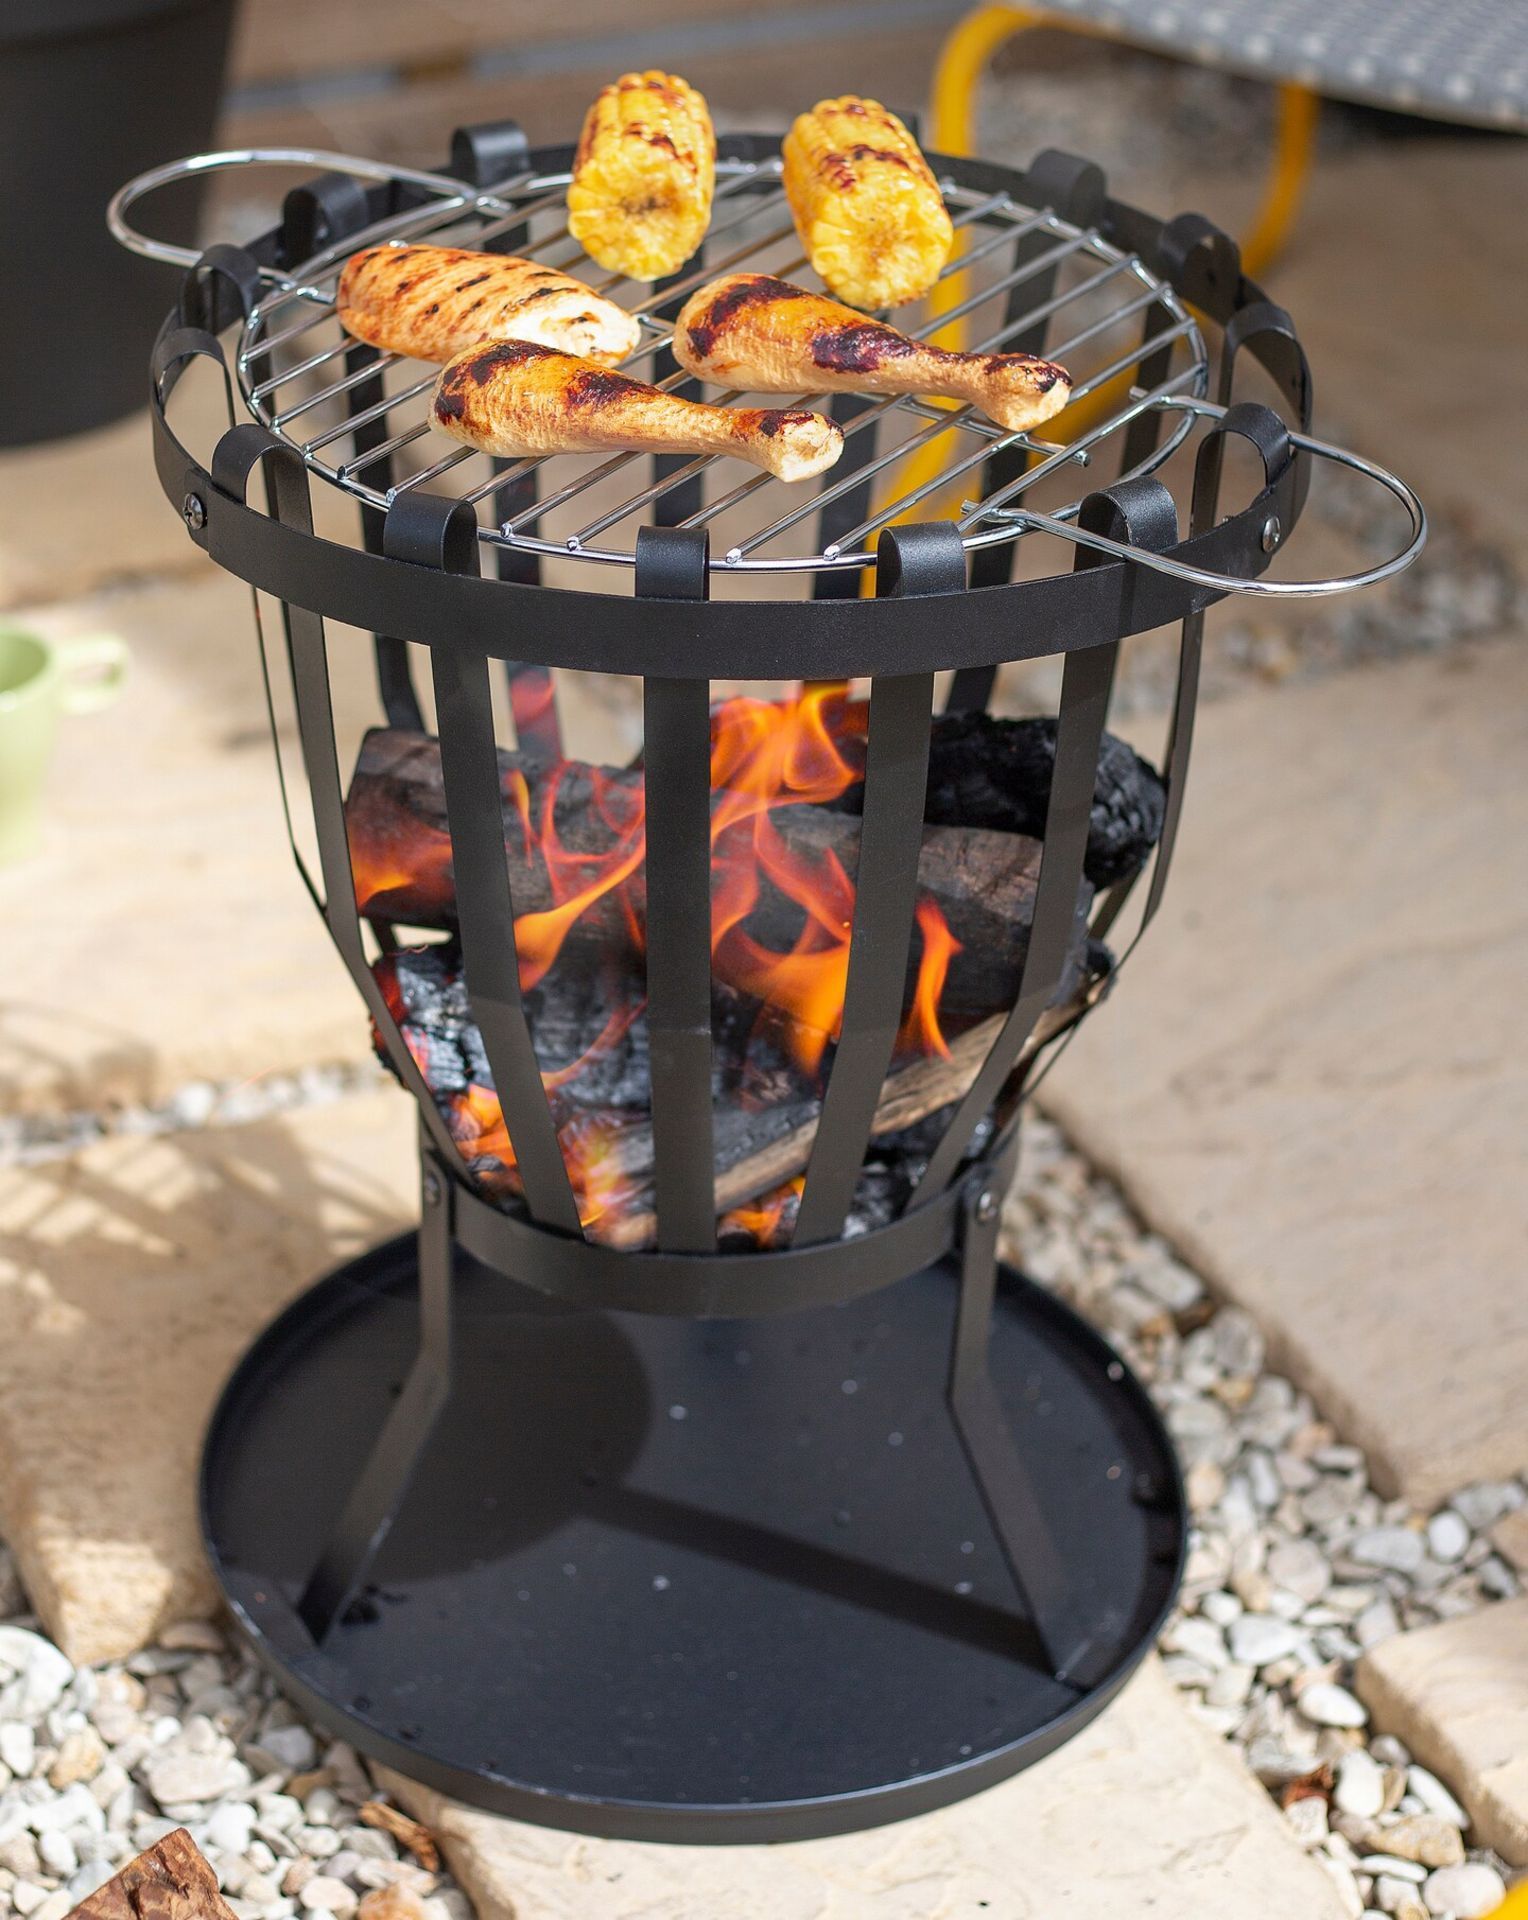 Trade Lot 10x NEW & BOXED LA HACIENDA Curitiba Fire Basket with Cooking Grill. RRP £55 EACH. The